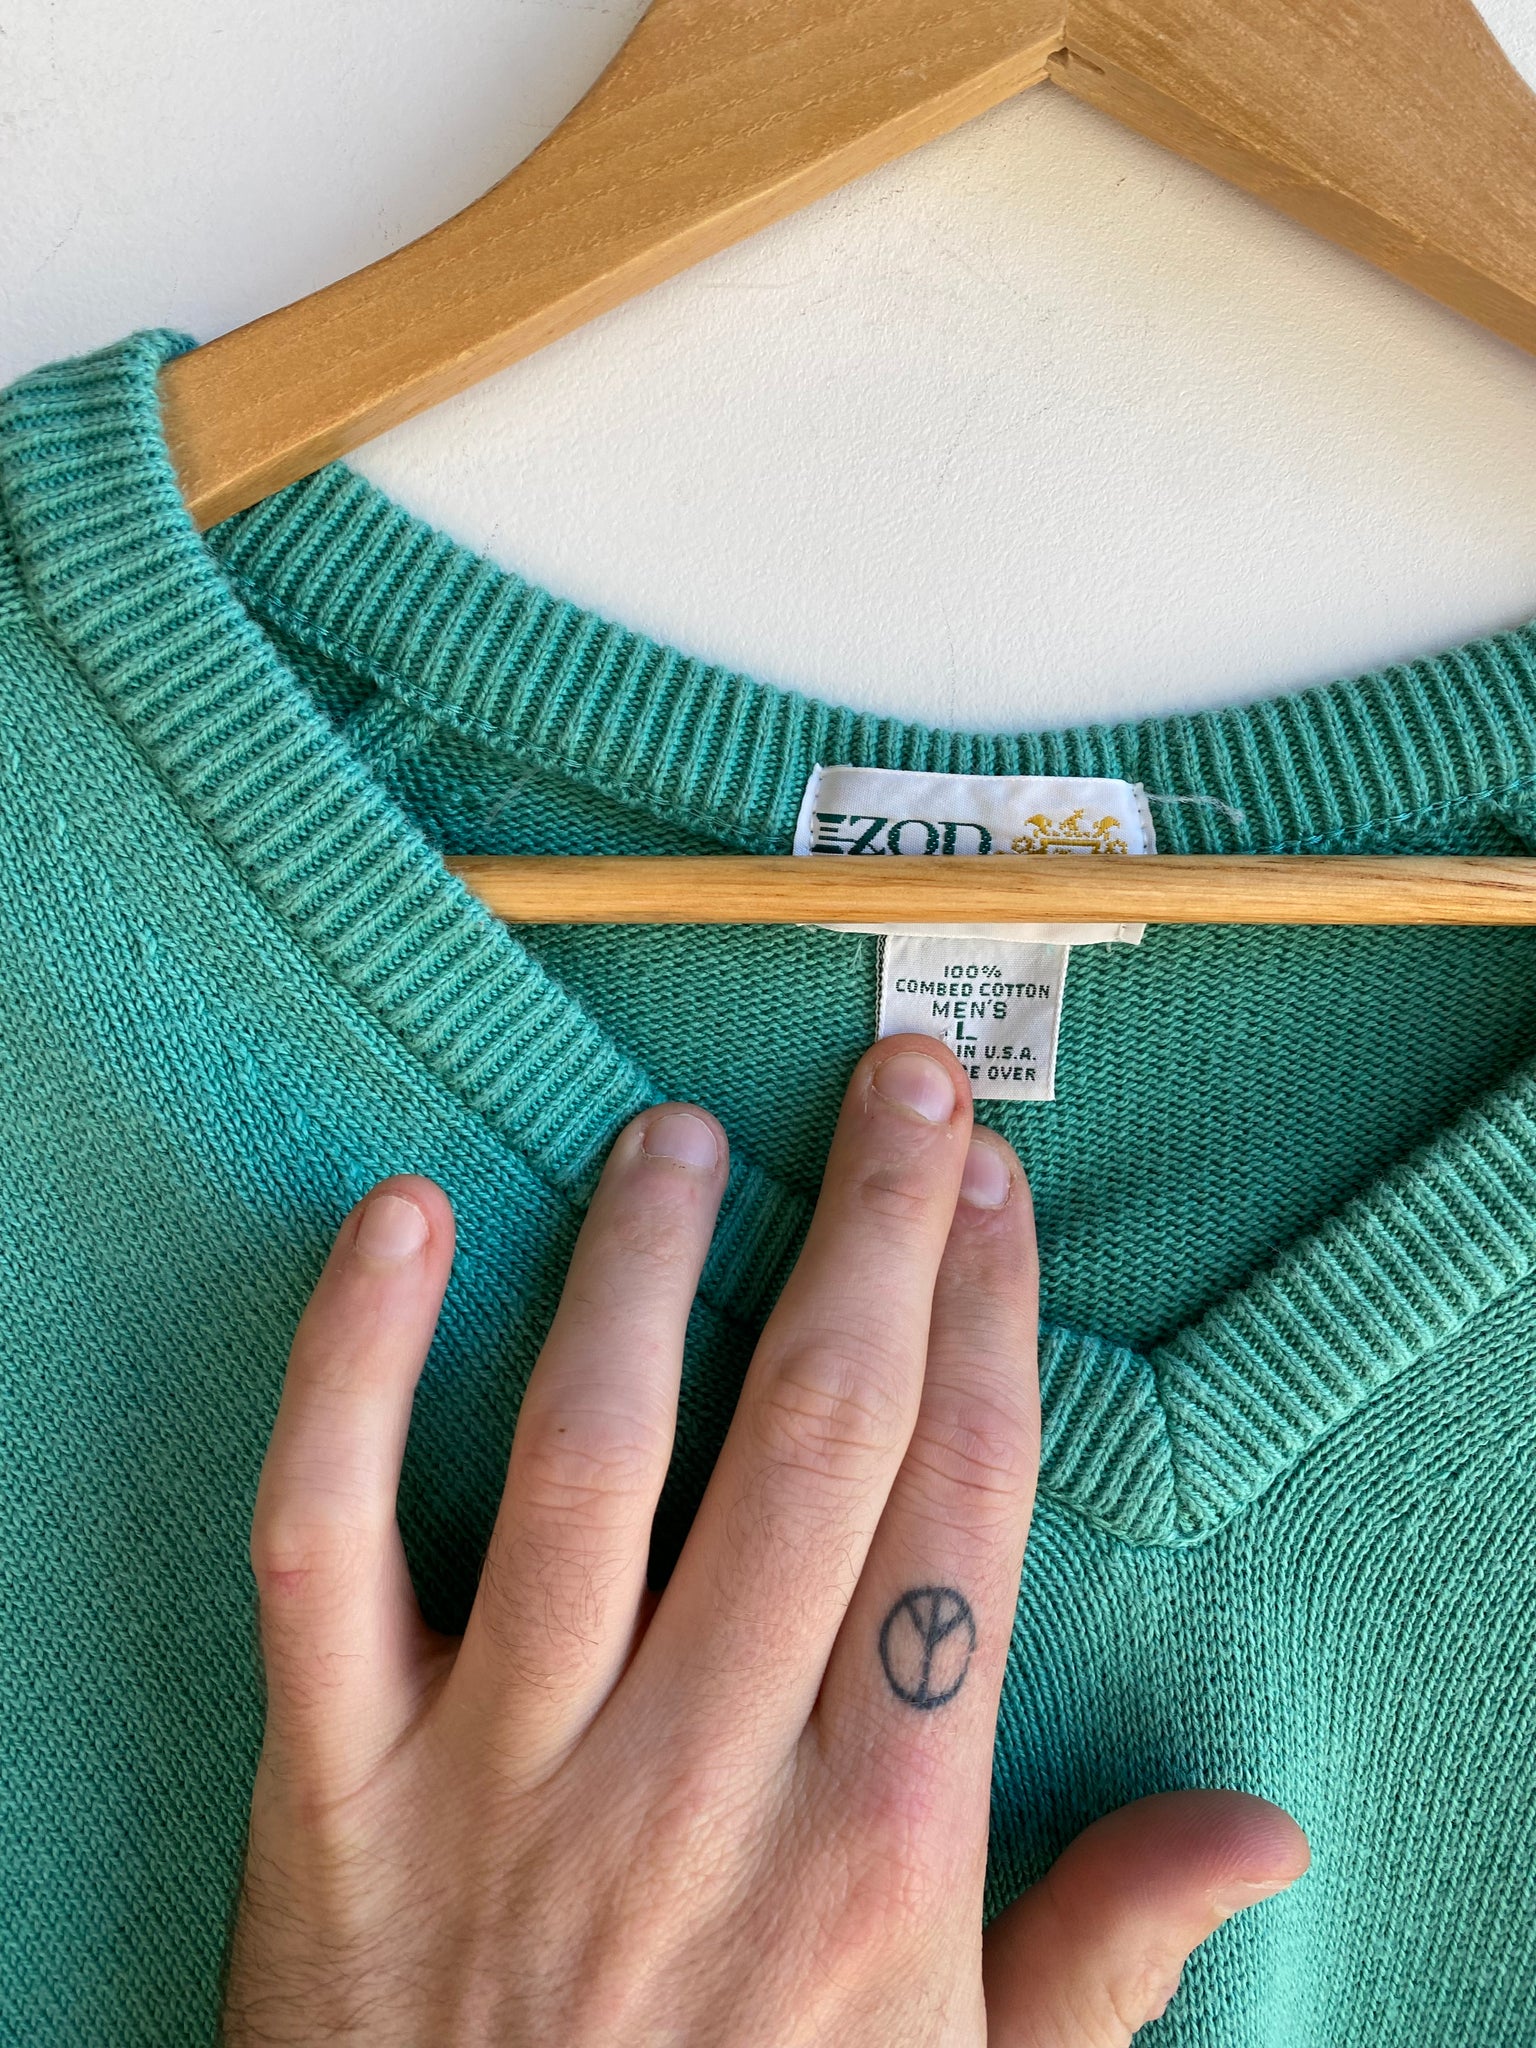 Turquoise Izod Knit Cotton Pullover